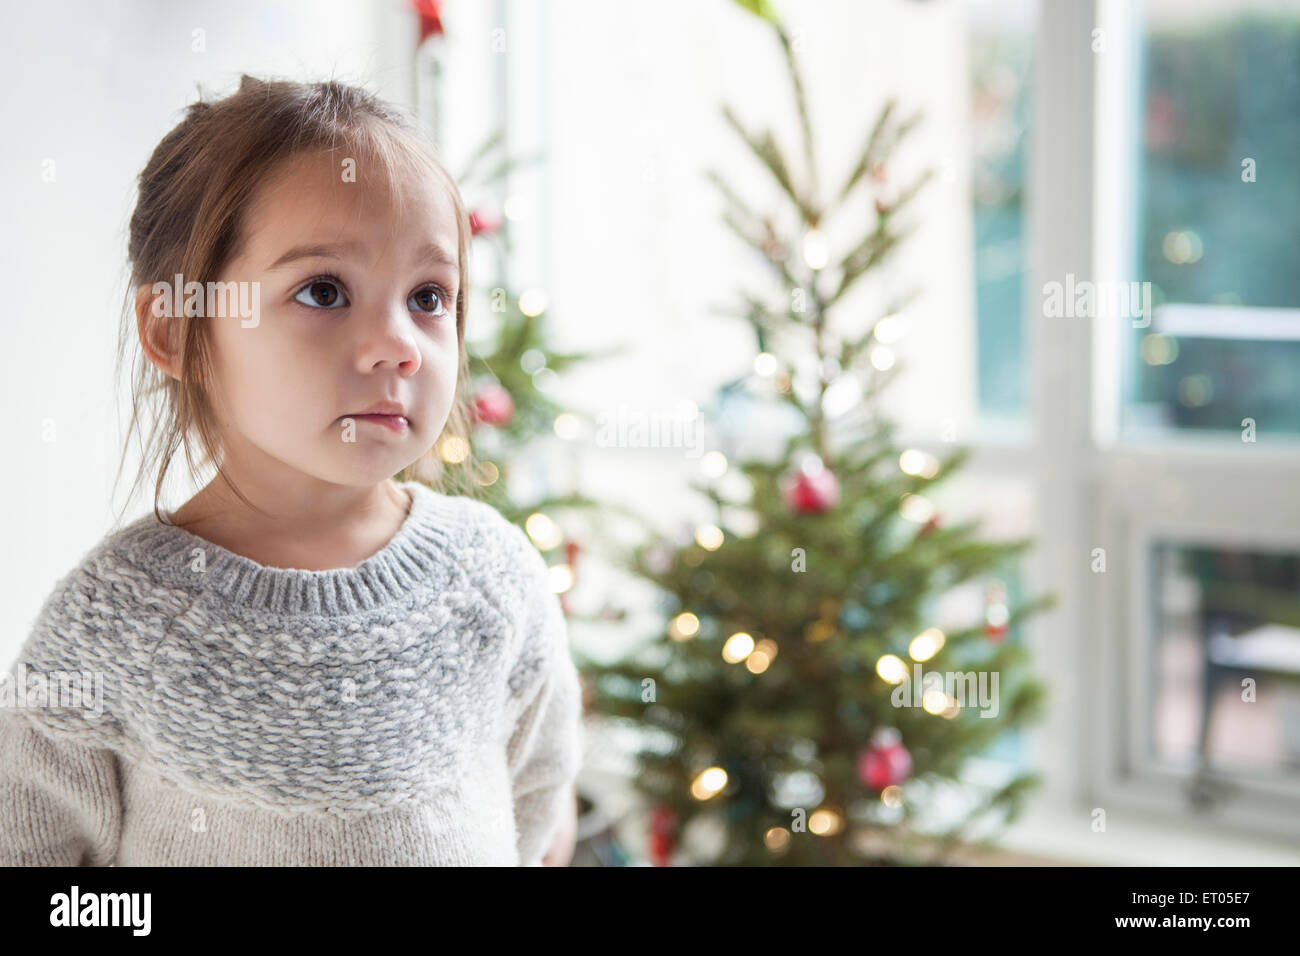 Wide-eyed girl looking up in front of Christmas Tree Banque D'Images